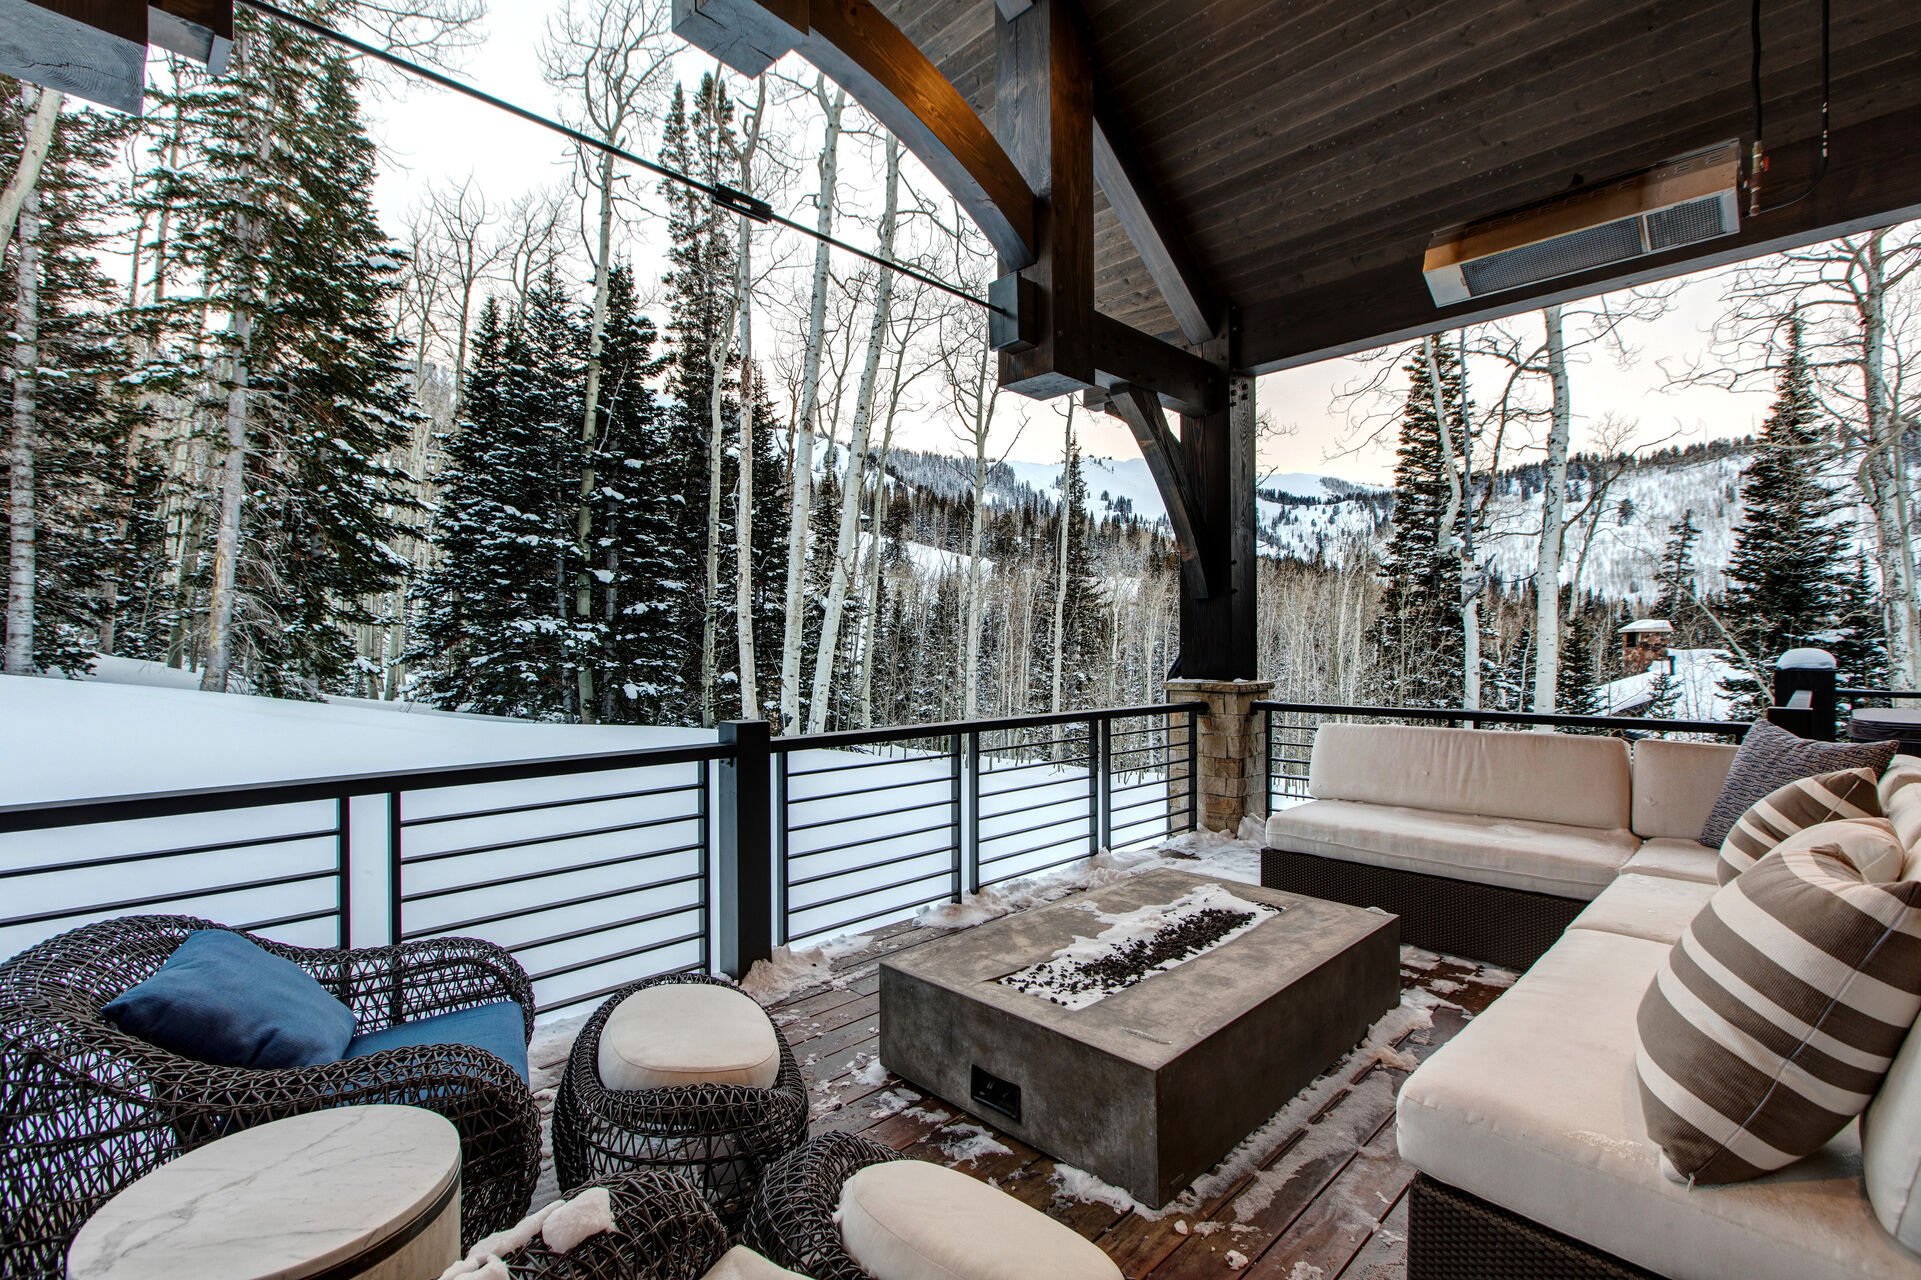 Covered Deck with an Abundance of Outdoor Furniture, including a Fire Table, and Commercial Heaters